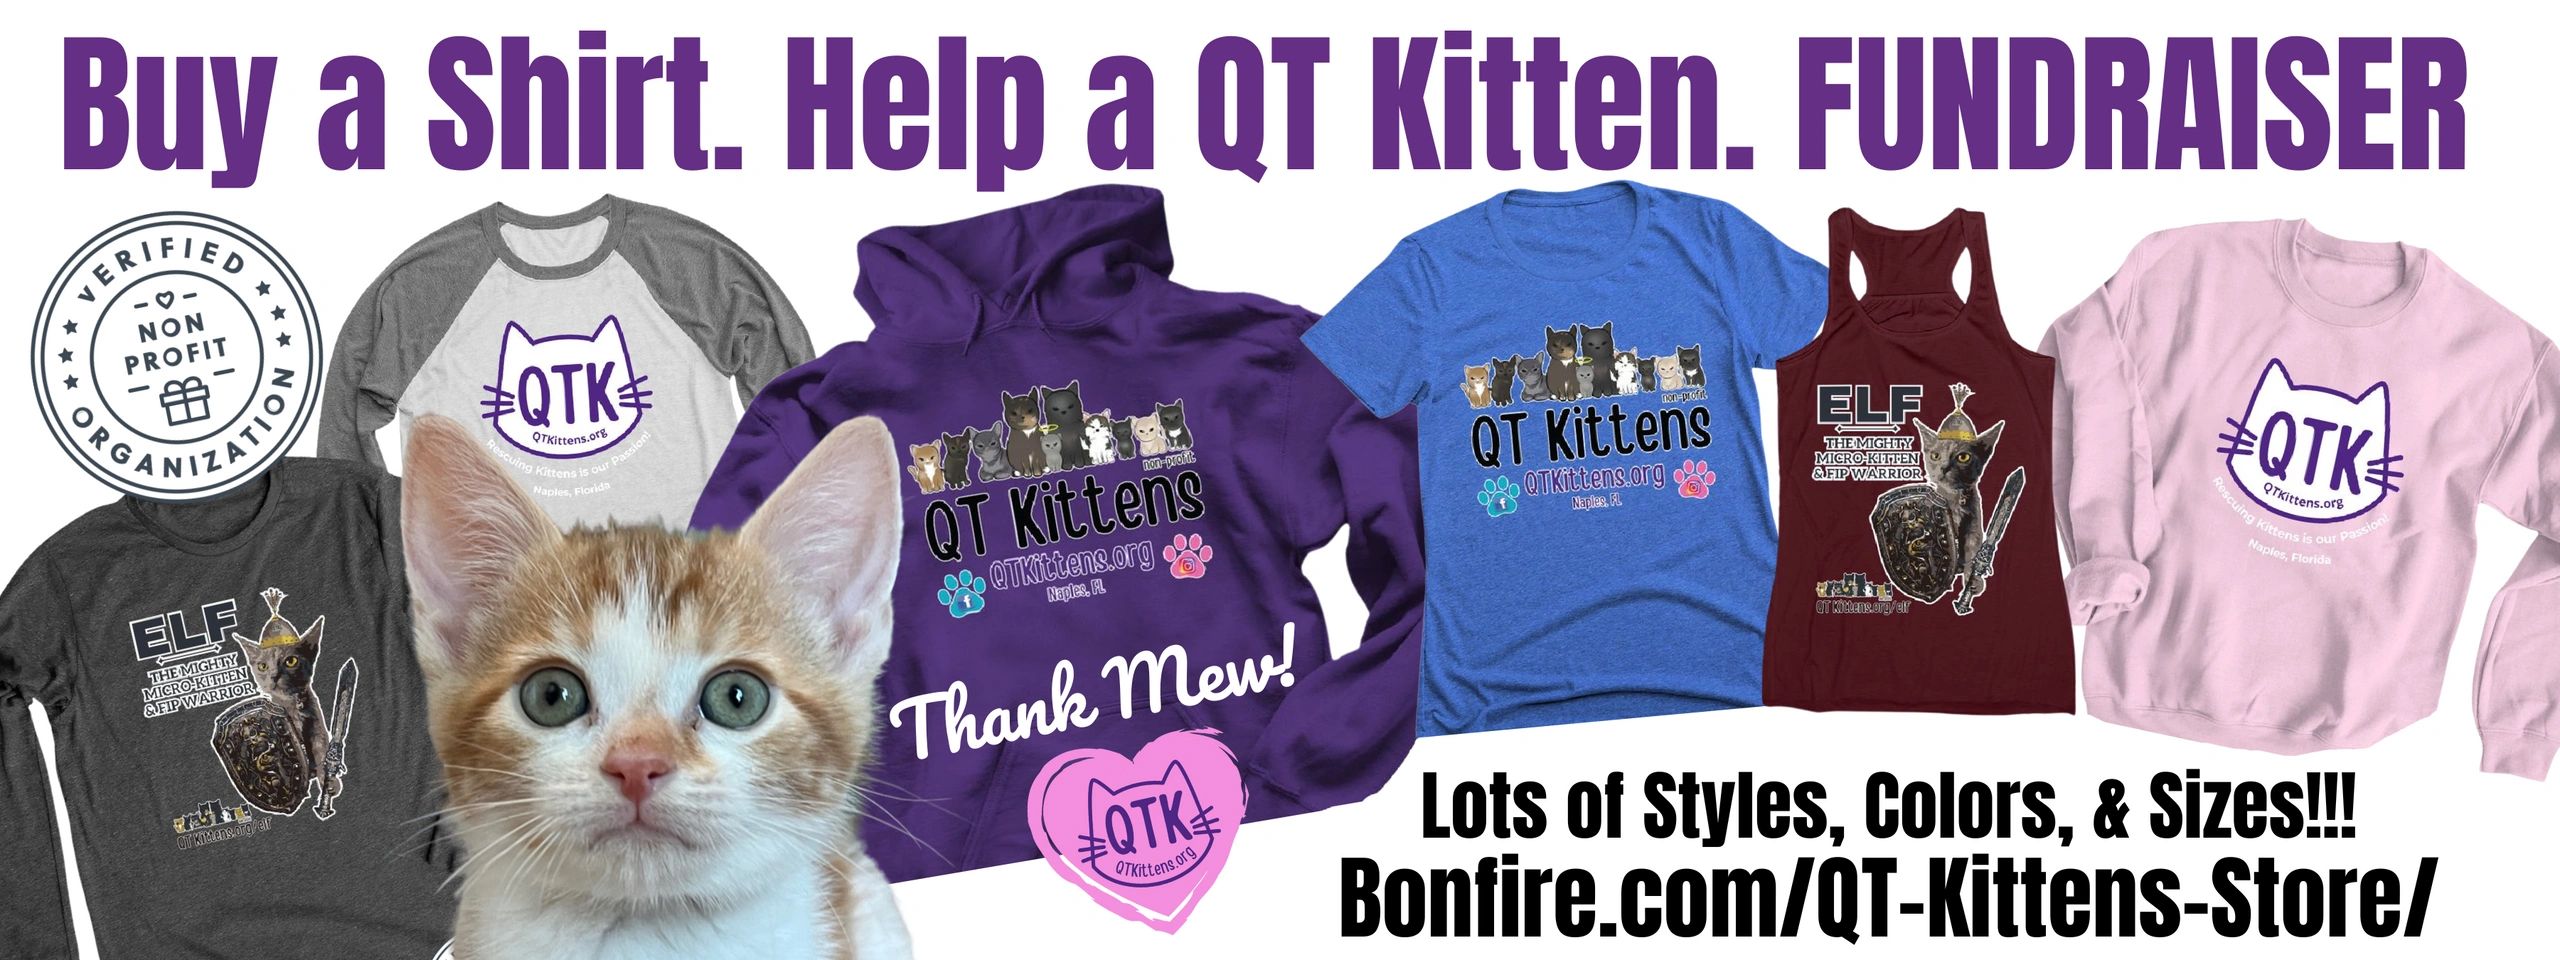 kitten in front of QT Kitten shirts that are available to purchase as a fundraiser